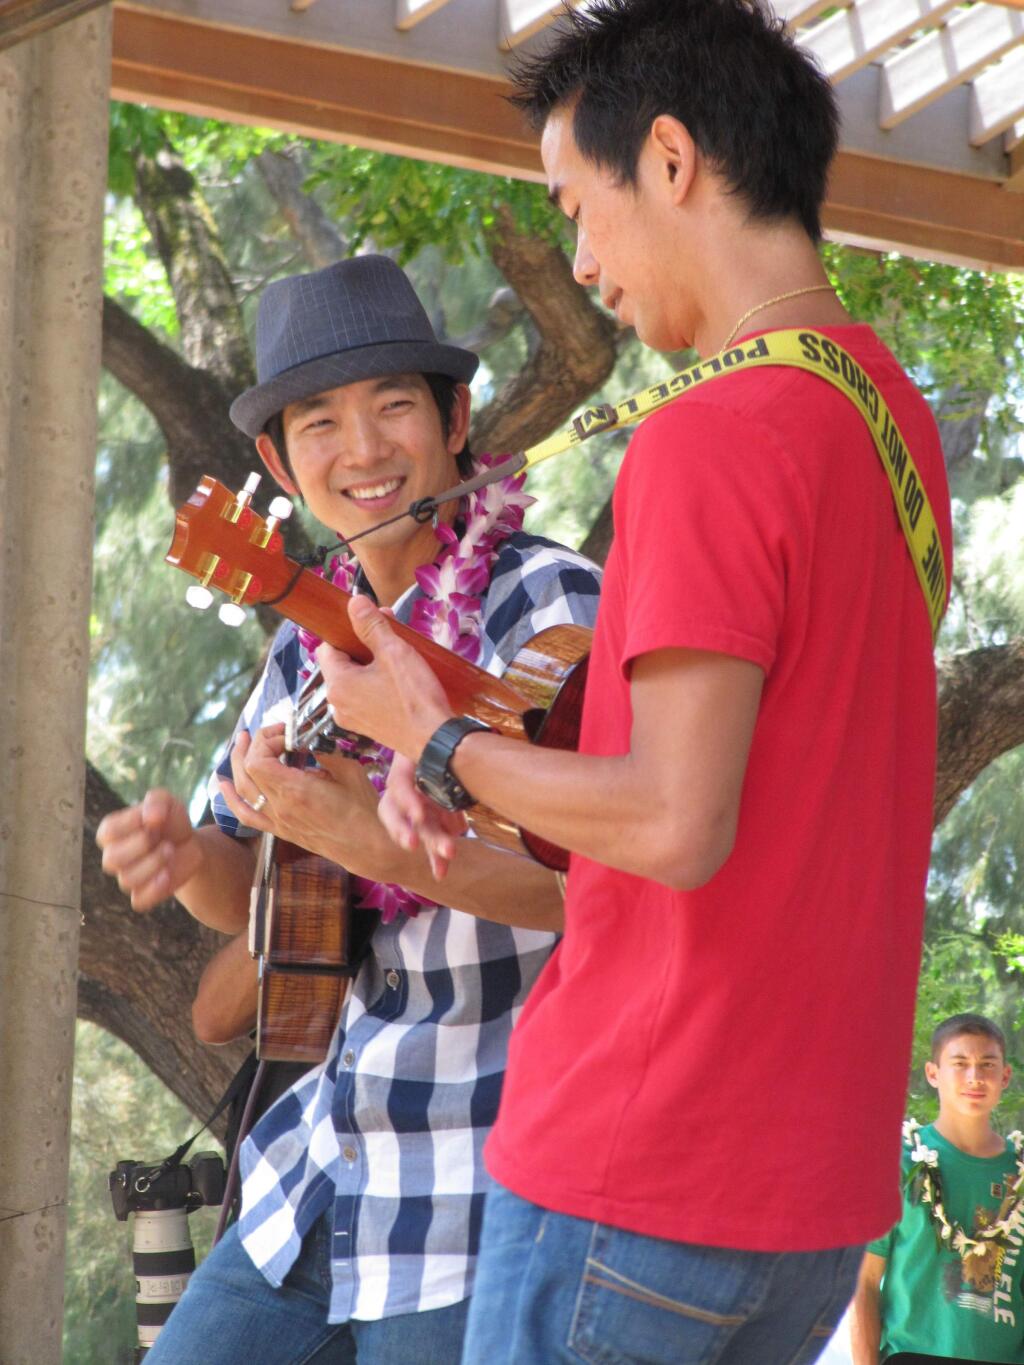 Jake Shimabukuro, left, performs with his brother Bruce Shimabukuro at the 41st Annual Ukulele Festival in Honolulu. (Audrey McAvoy/ Associated Press)